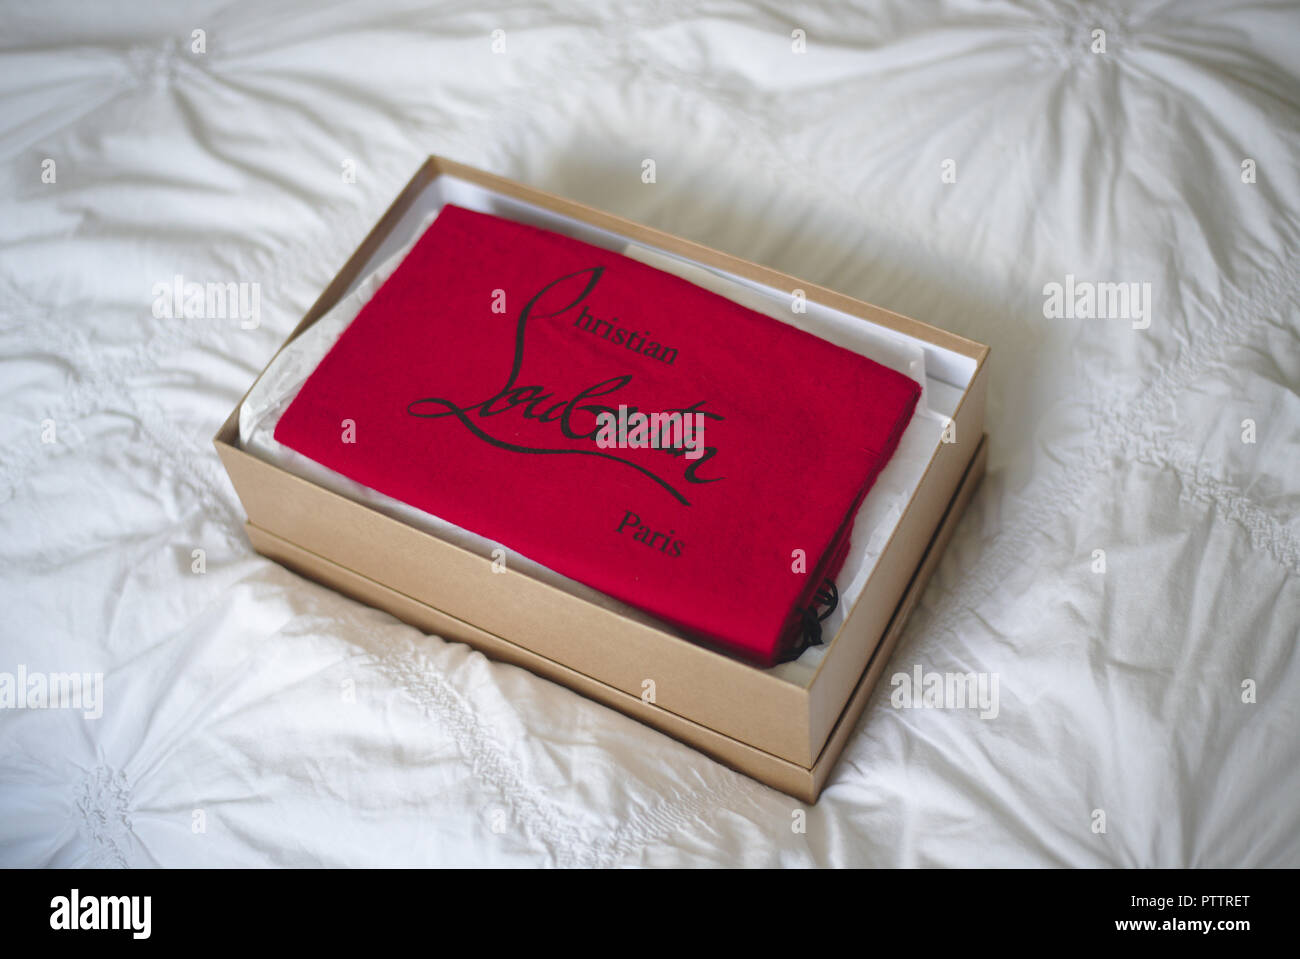 Christian Louboutin Shoes in a box on a white duvet Stock Photo ...